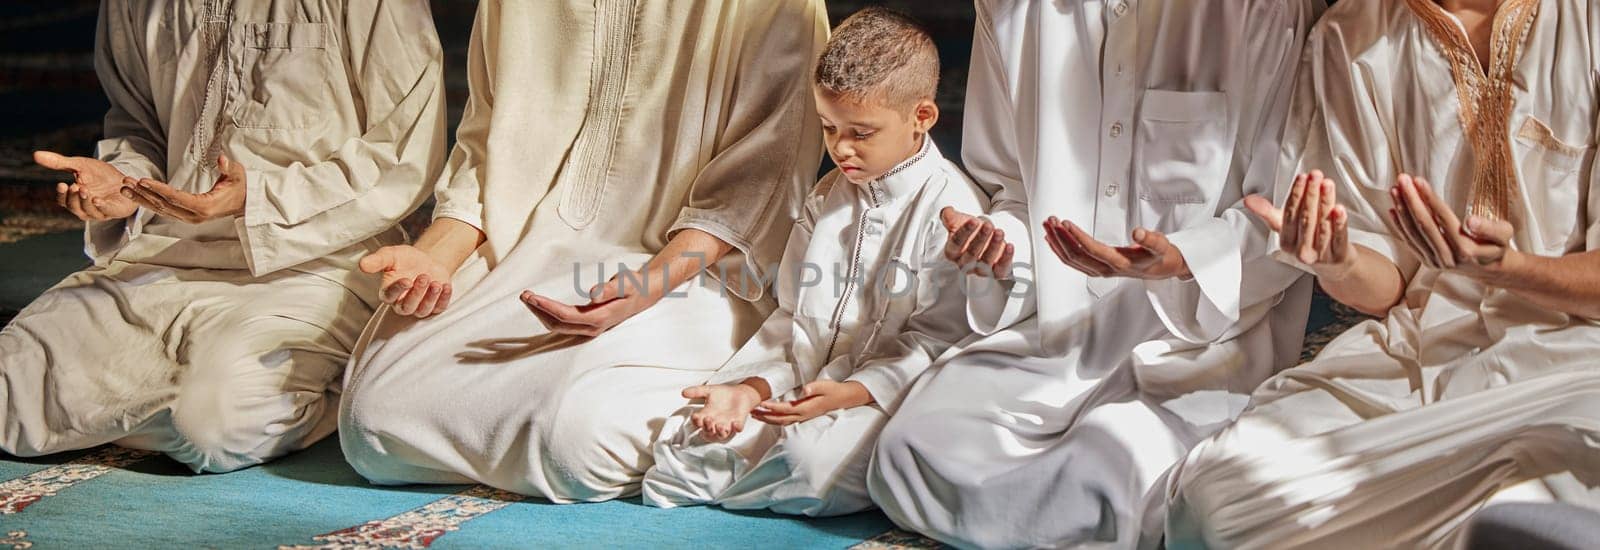 Muslim pray, child or men learning to worship Allah in holy temple or mosque with gratitude as a family. Islamic, education or people in praying with boy or kid for Gods teaching, spiritual peace.